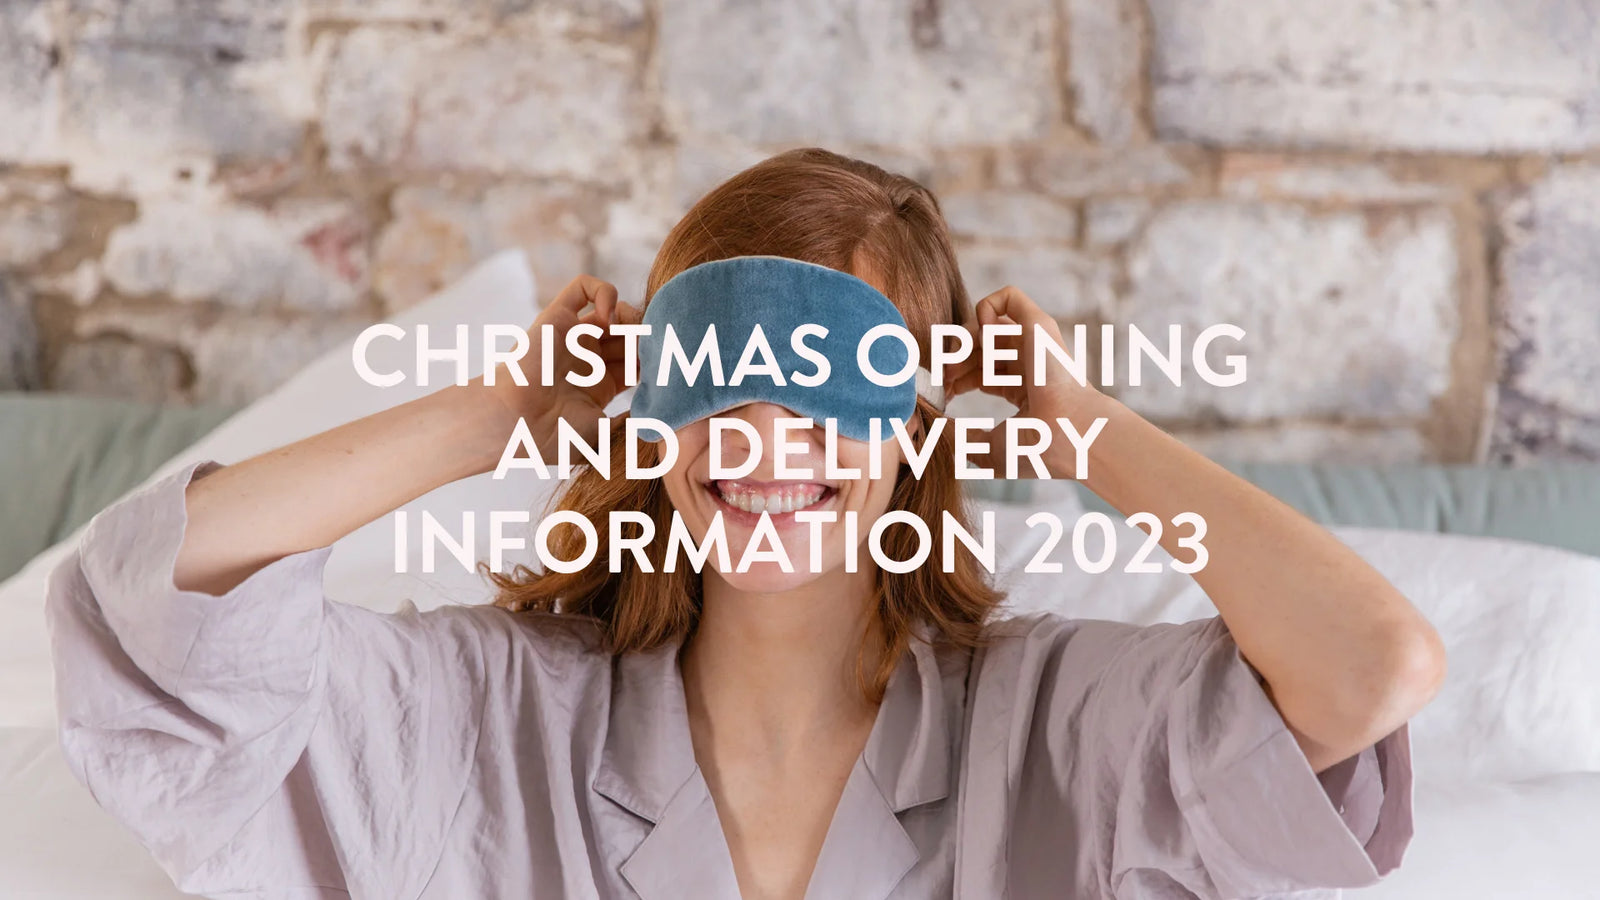 Putnams Christmas Opening and Delivery Information 2023